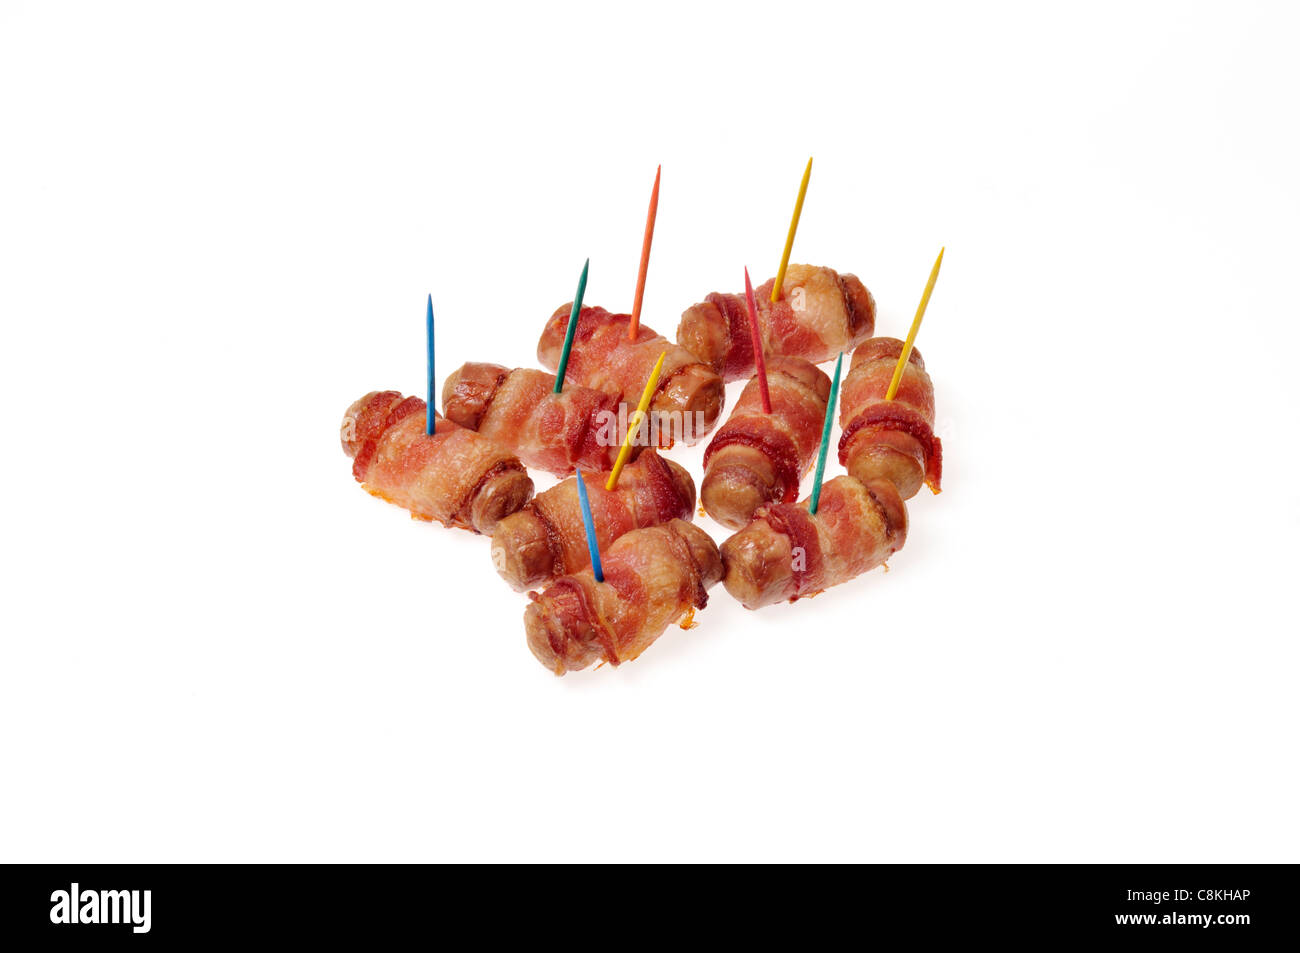 Pigs in blanket, sausages wrapped in bacon, appetizers with multi coloured toothpicks on white background cutout Stock Photo